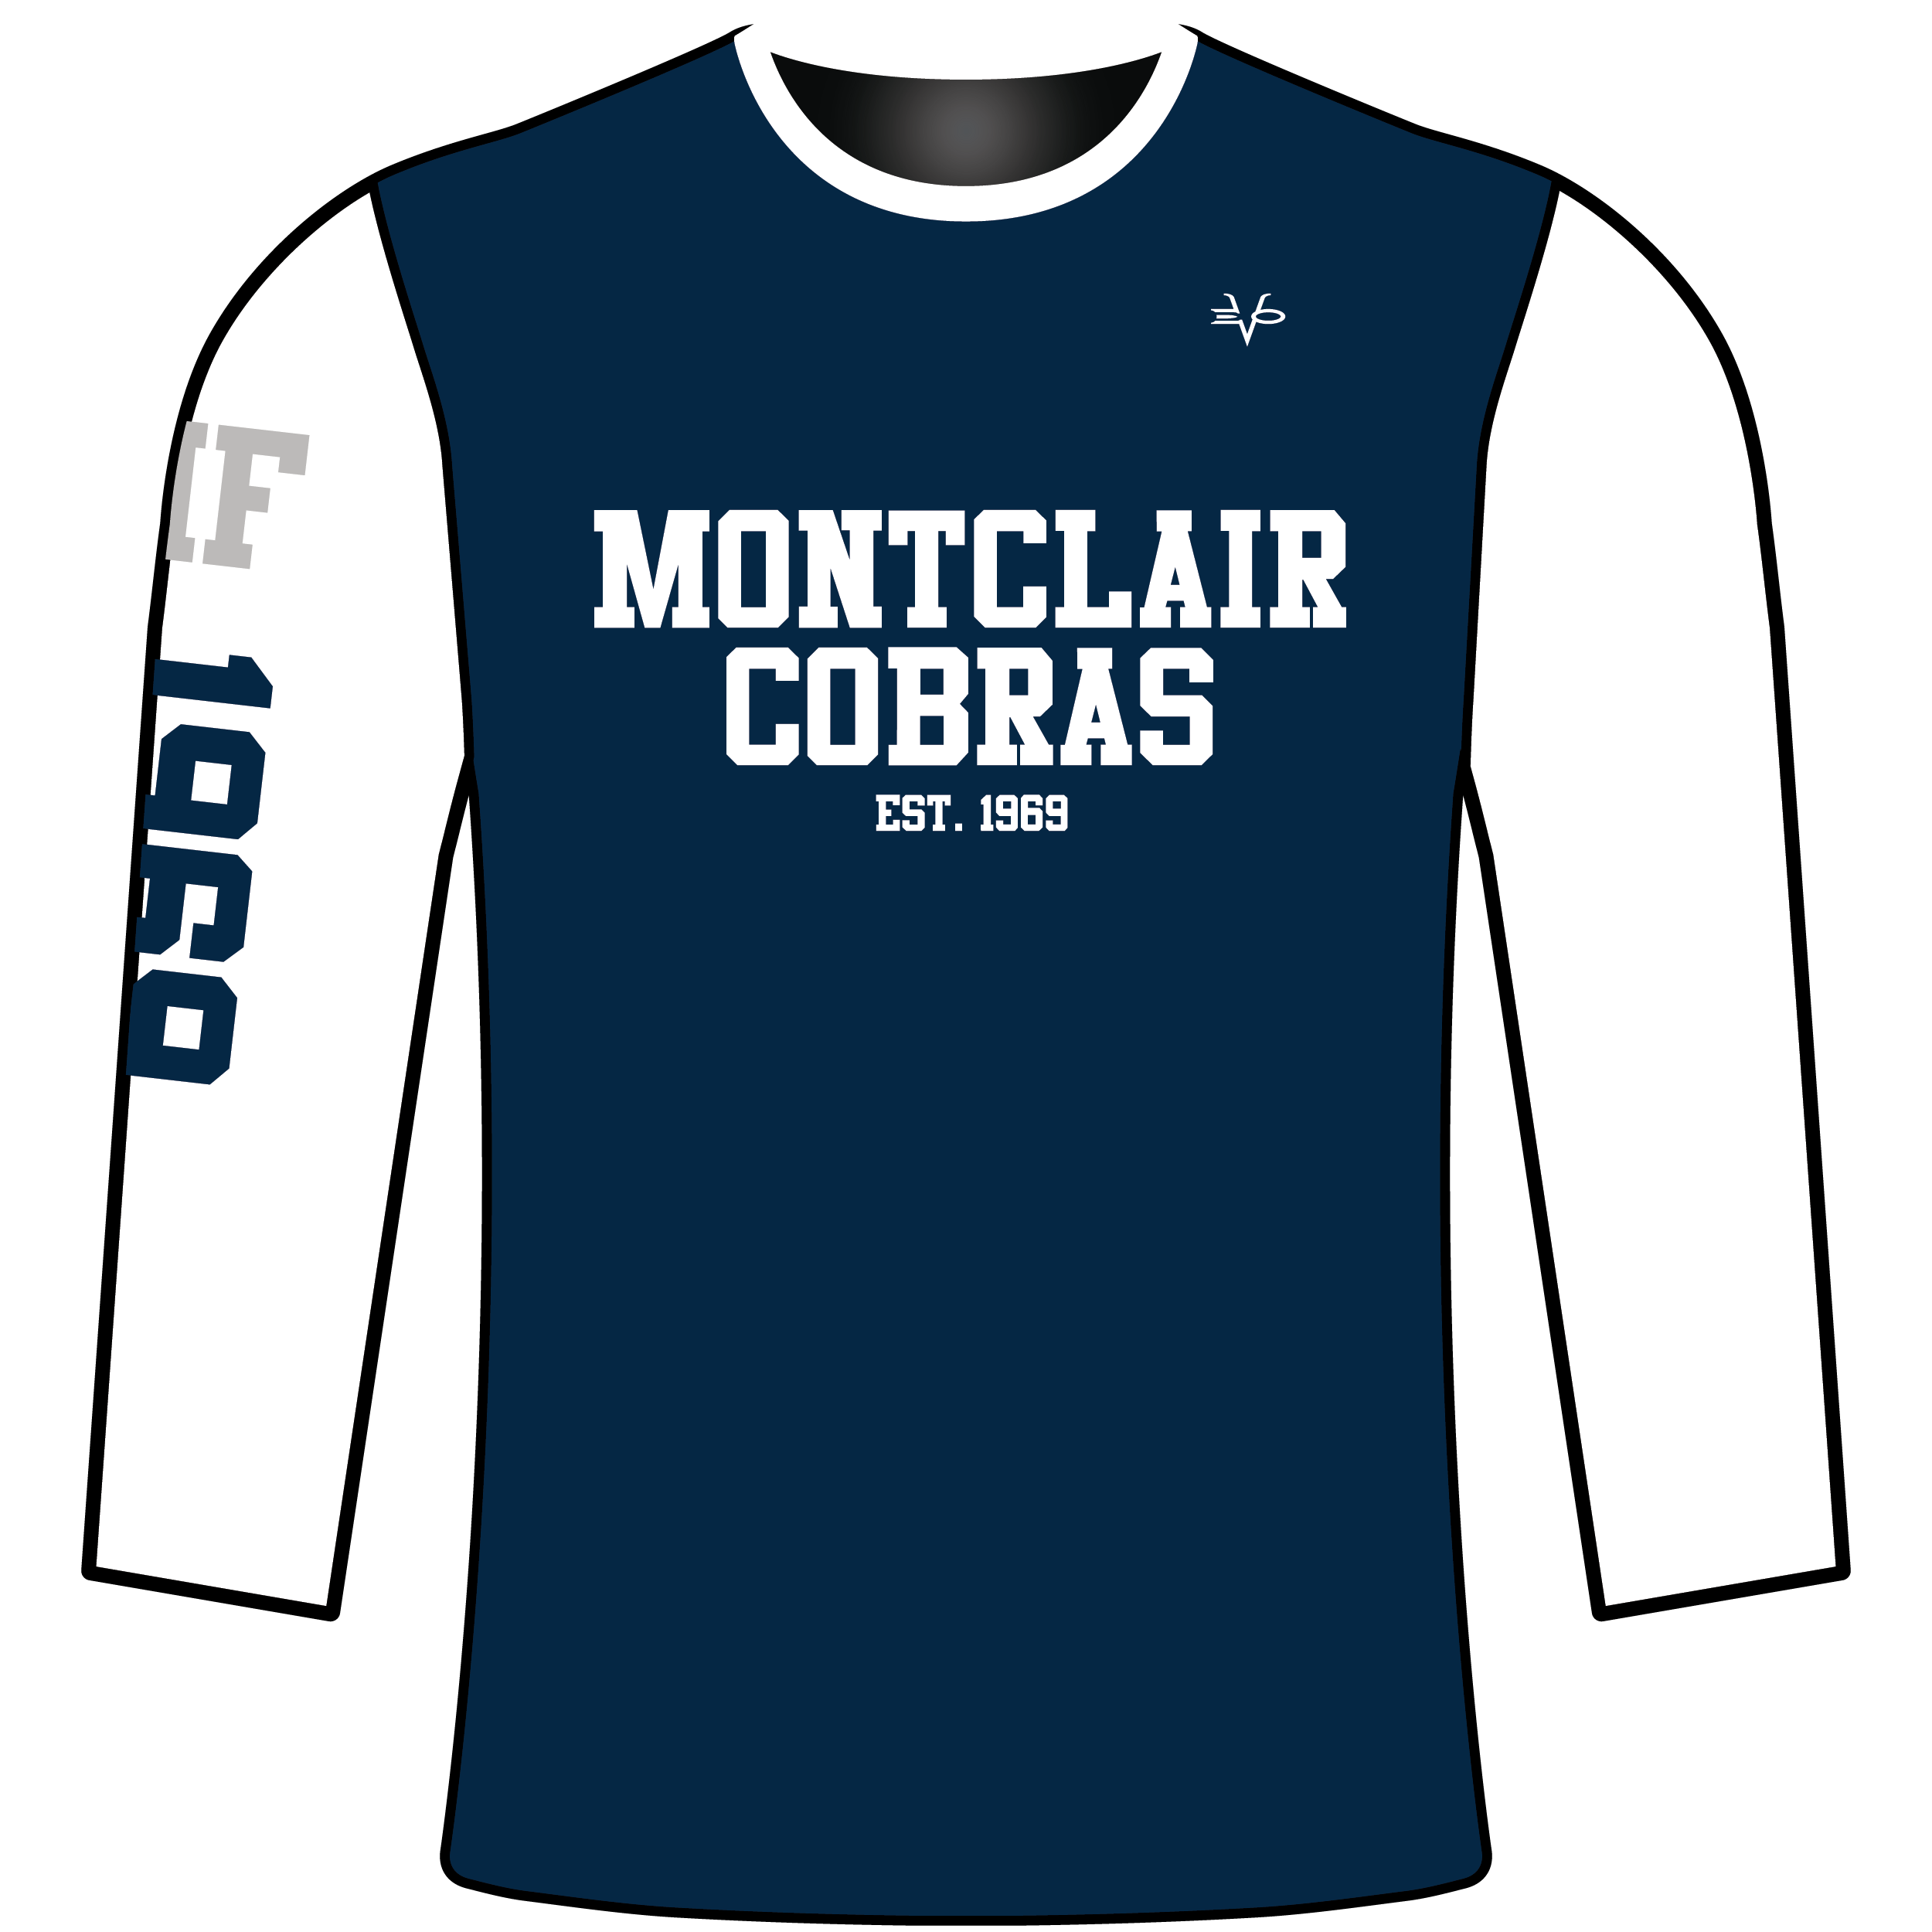 Sublimated Long Sleeve Blue Compression Jersey